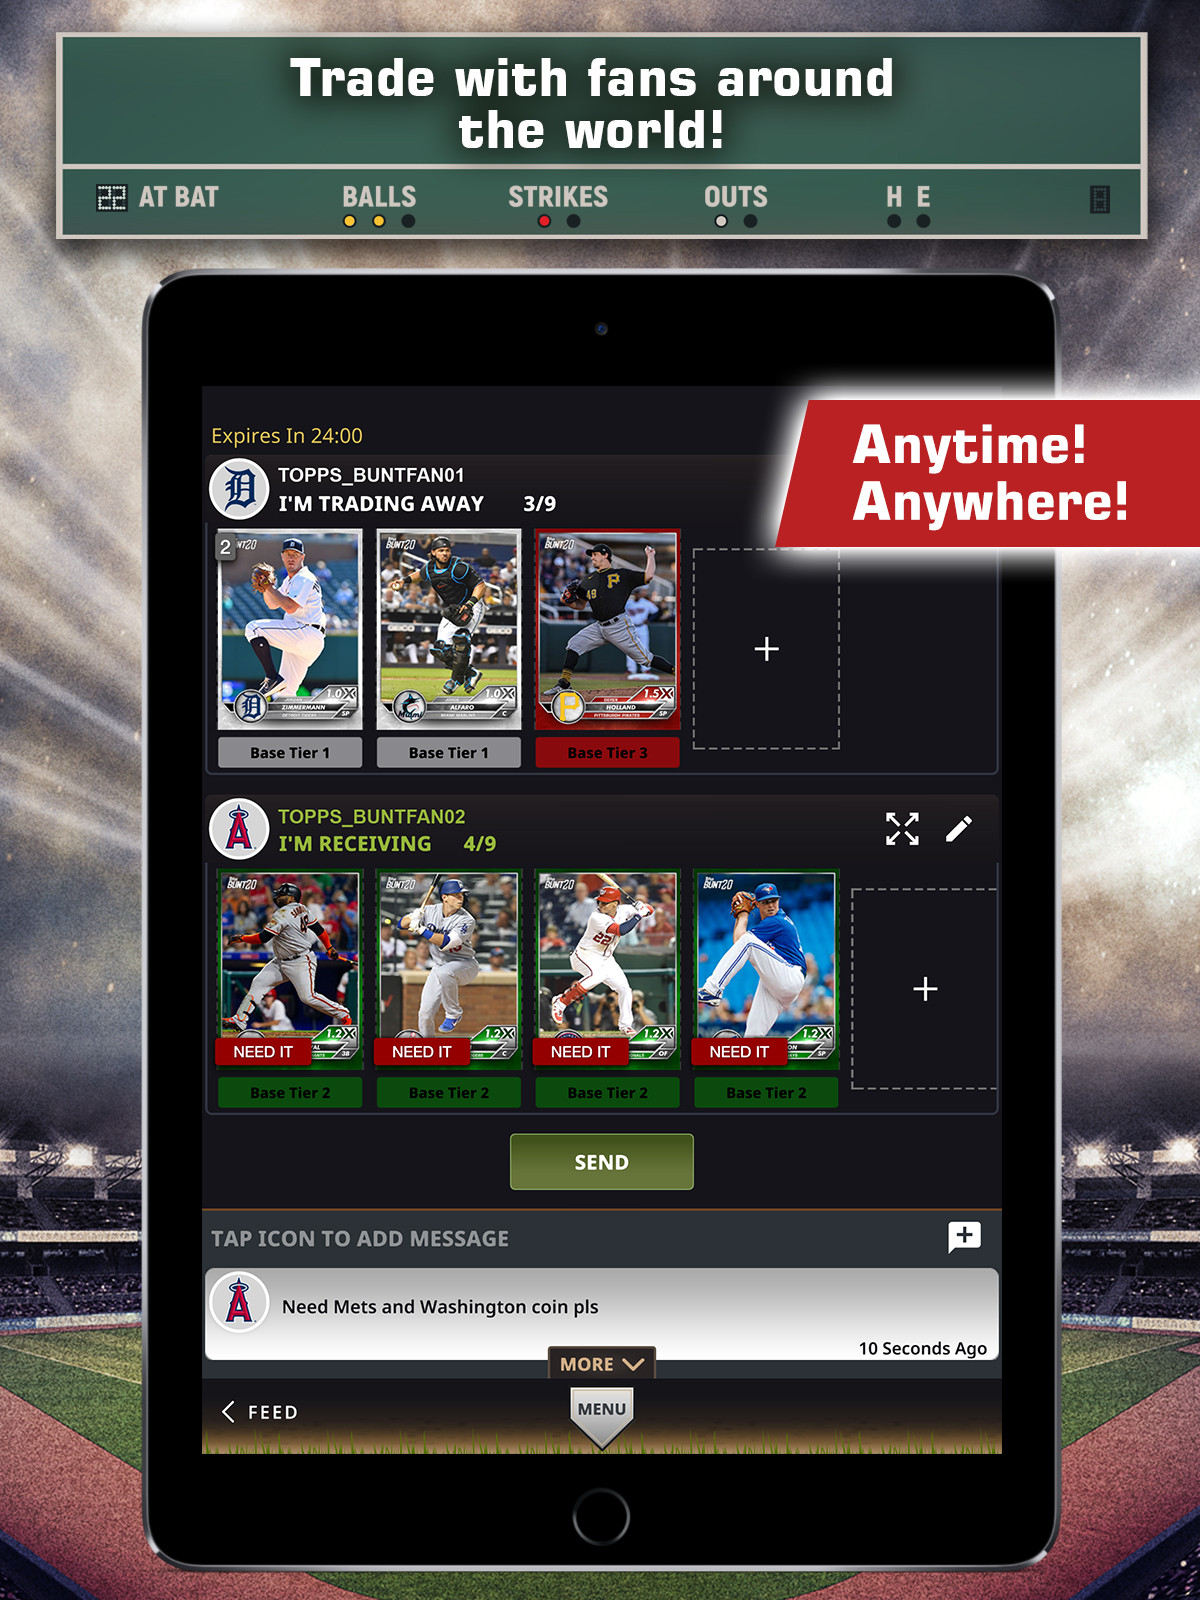 How do I claim a Promo or Redemption Code? — Topps® BUNT® MLB Card